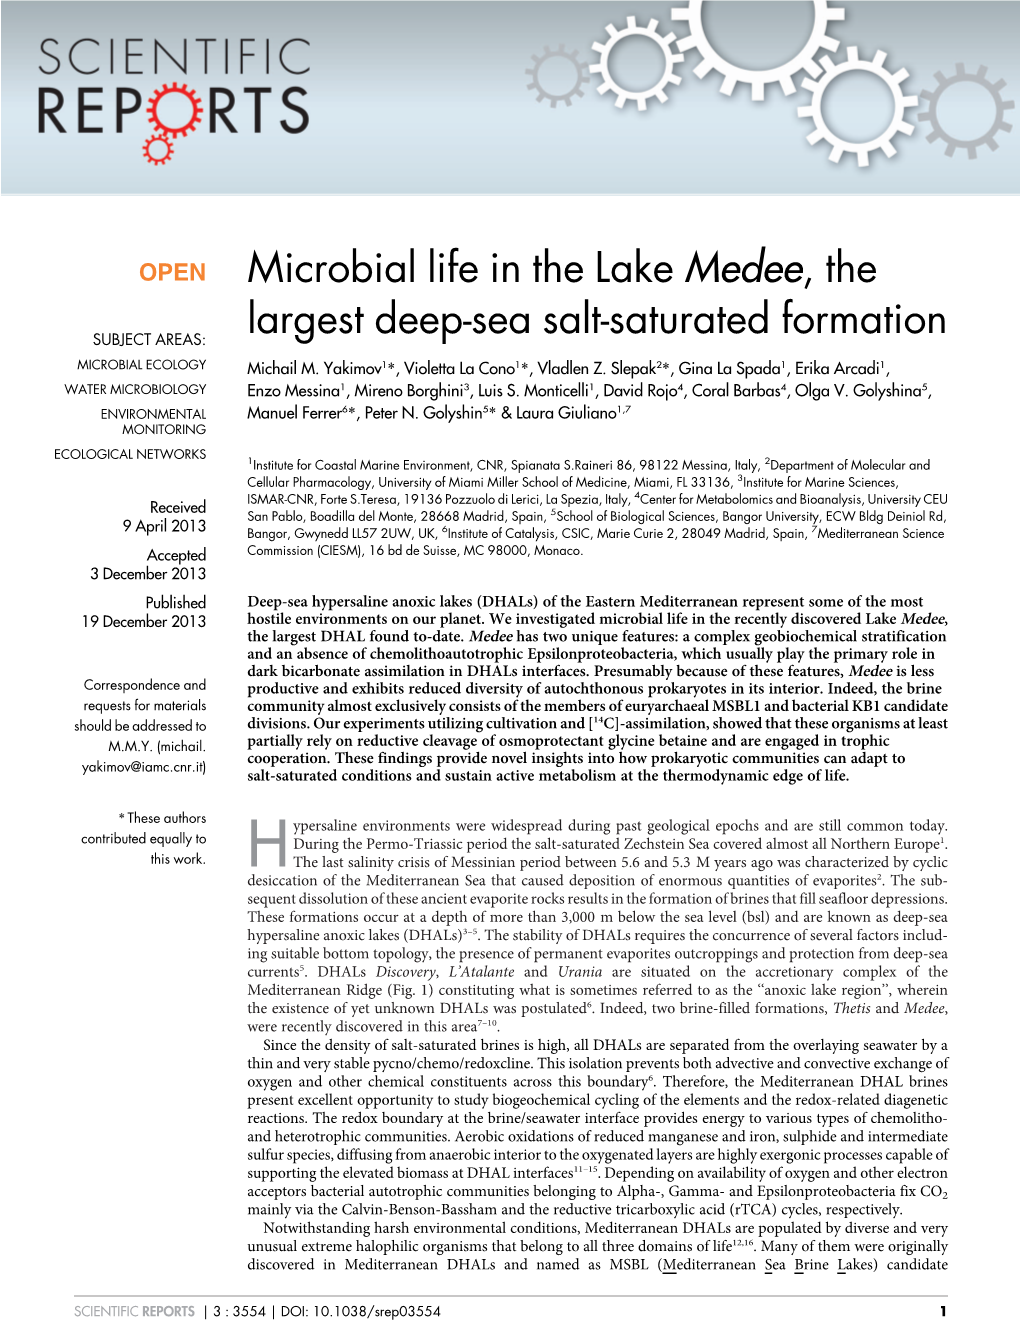 Microbial Life in the Lake Medee, the Largest Deep-Sea Salt-Saturated